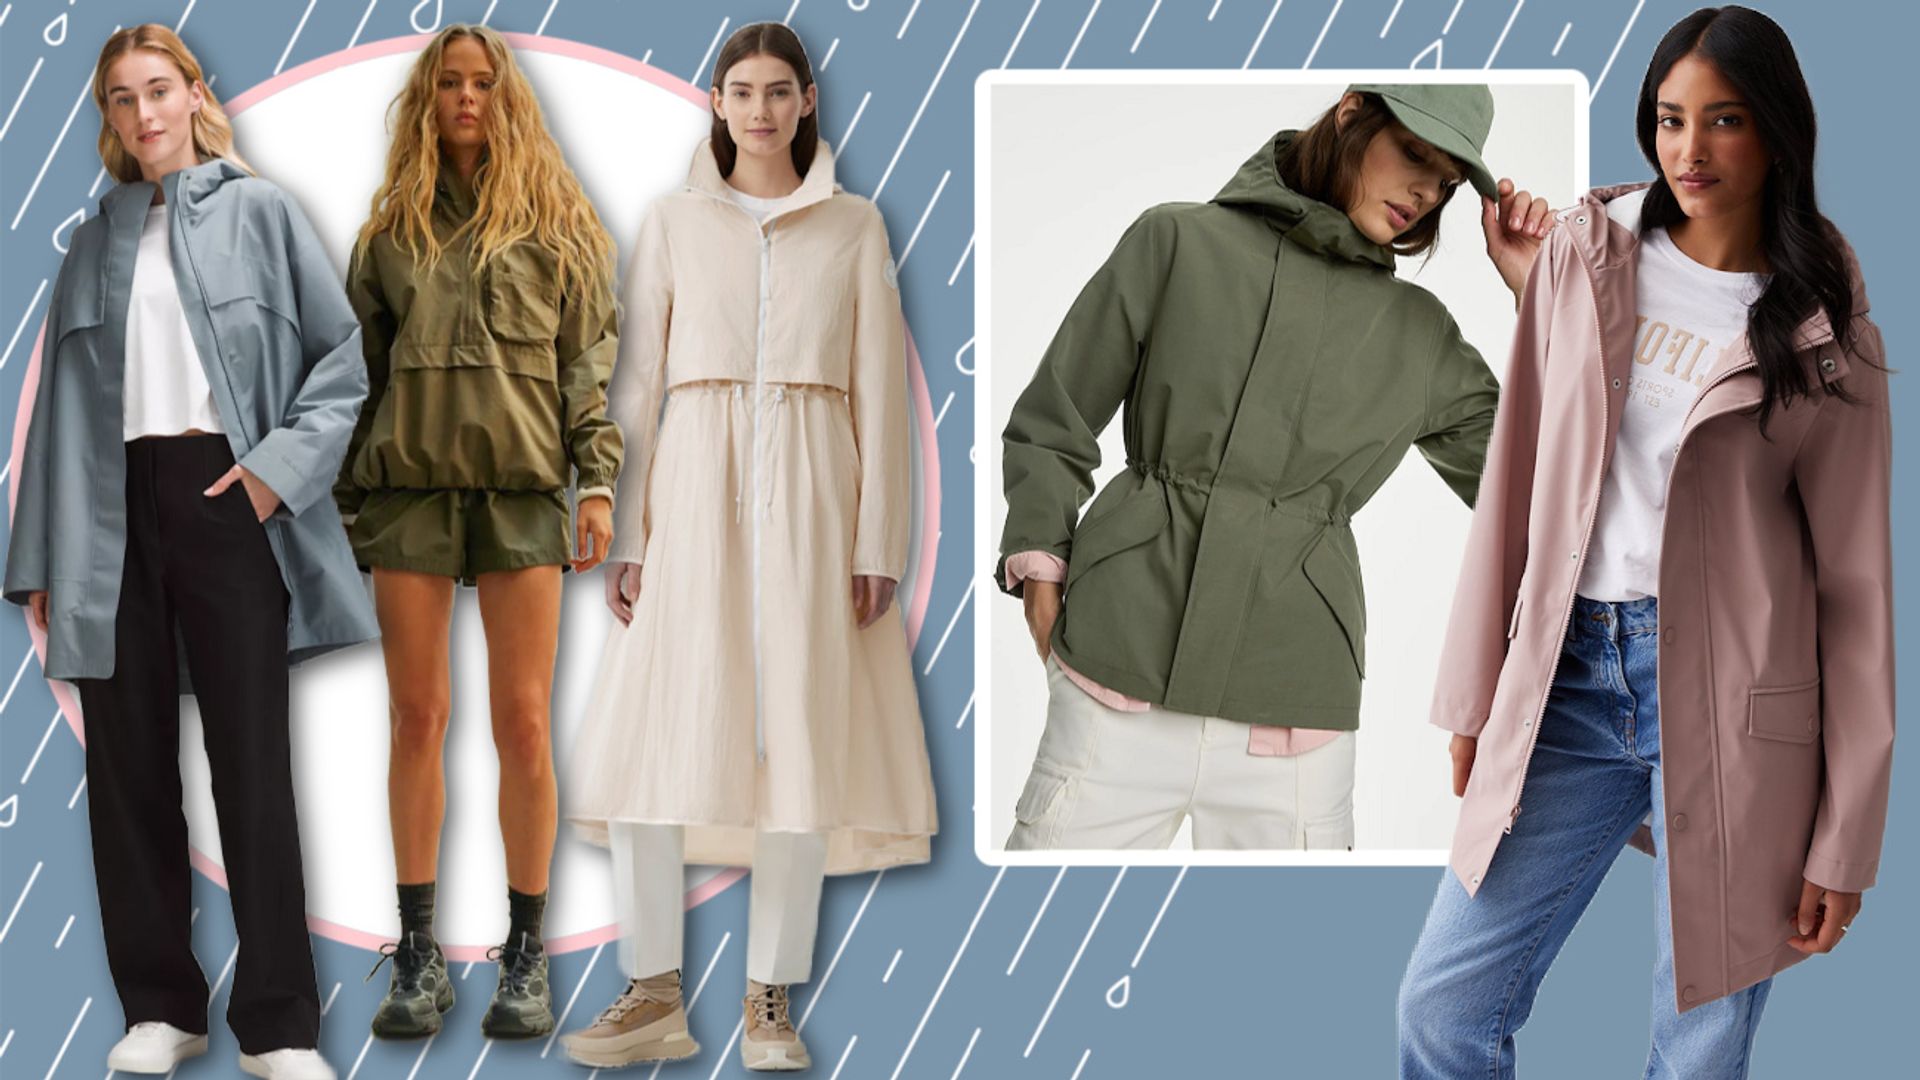 9 best waterproof jackets and raincoats for women this spring